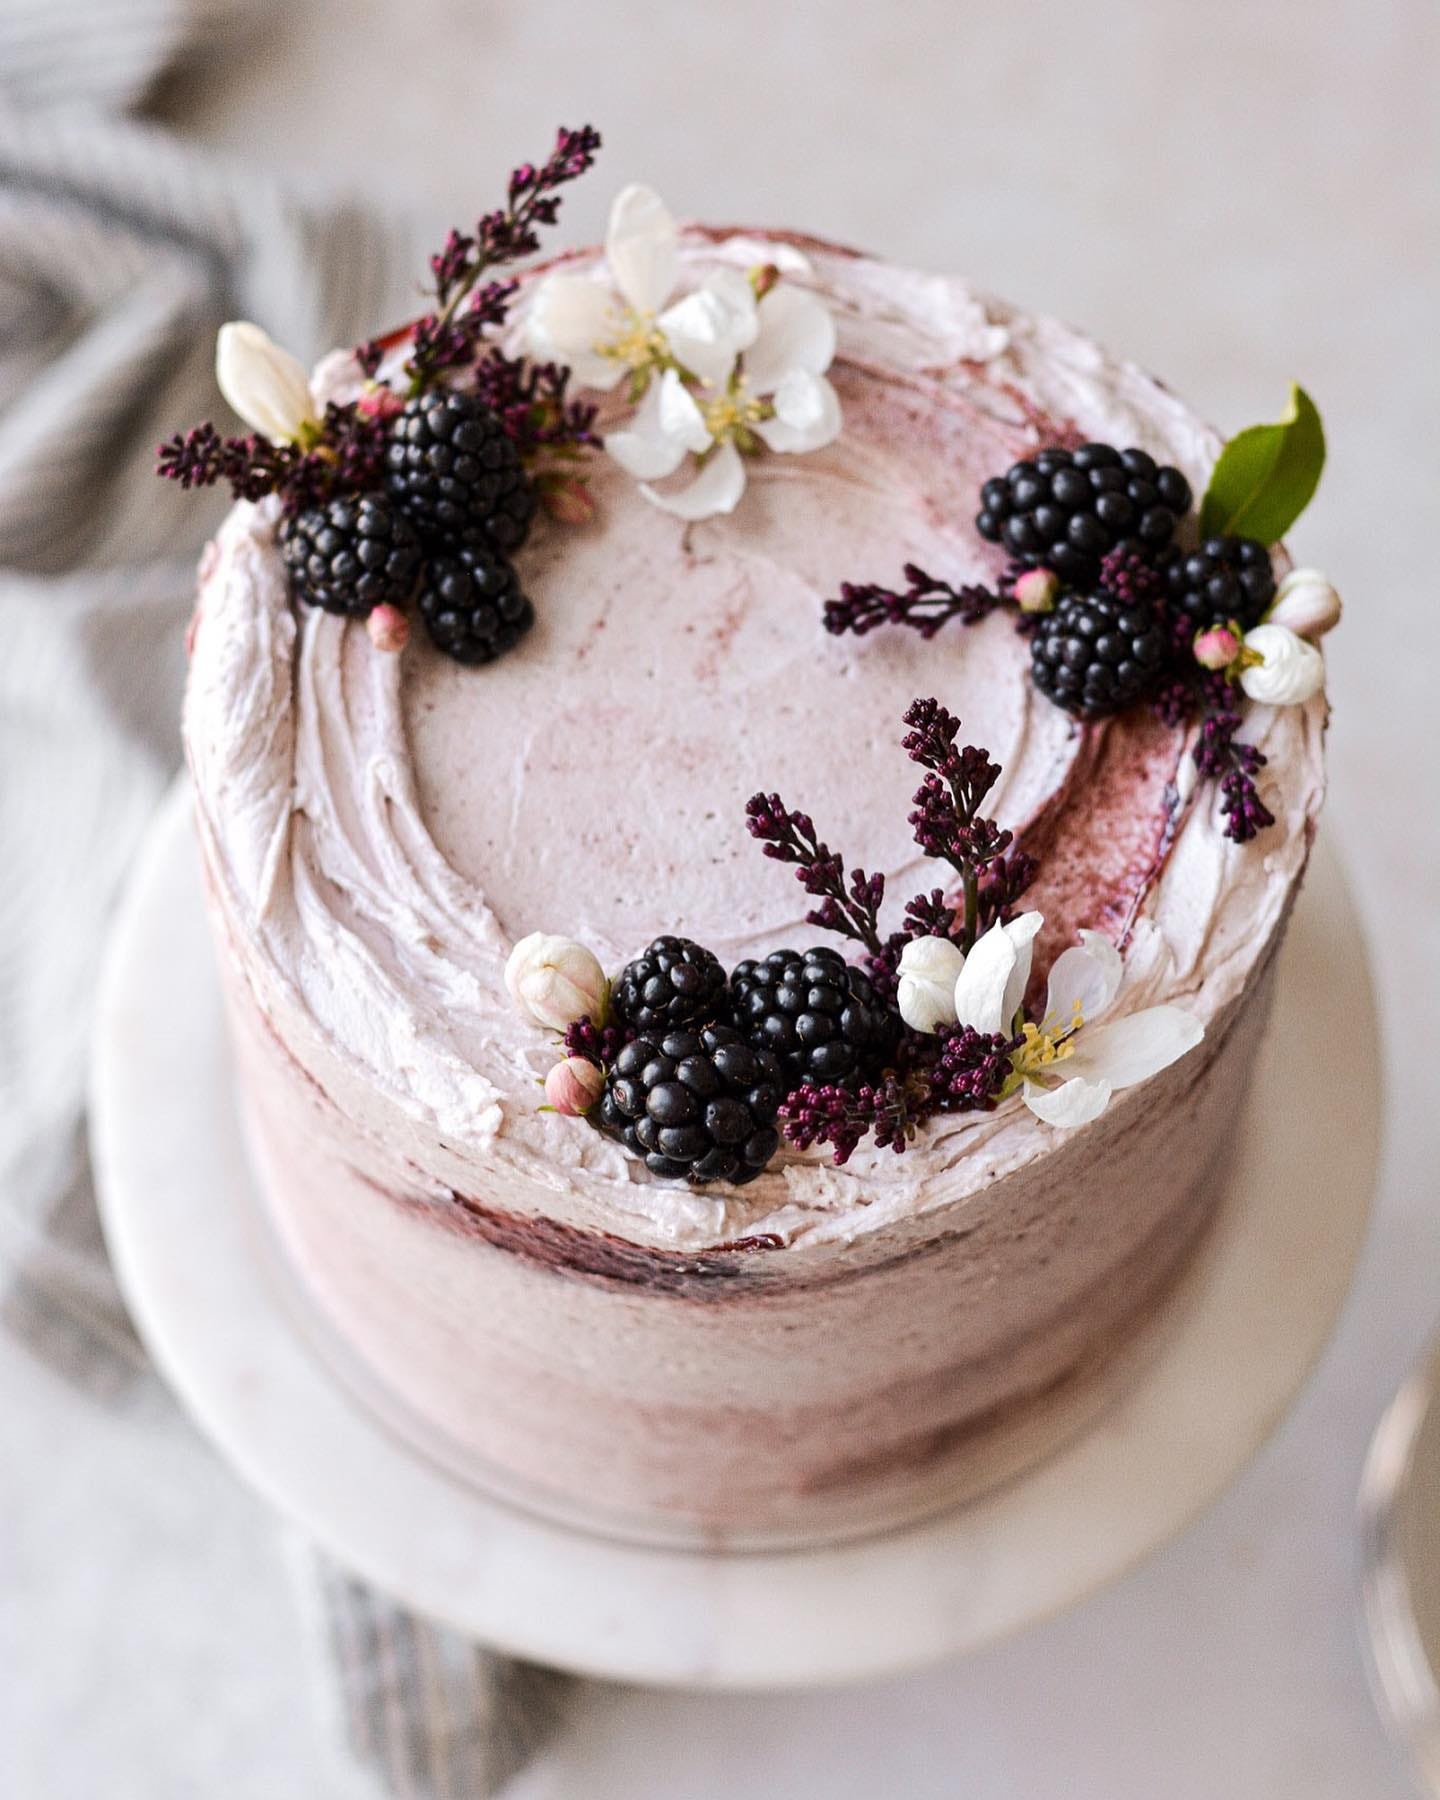 pink-swirled cake with blackberries and floral decorations